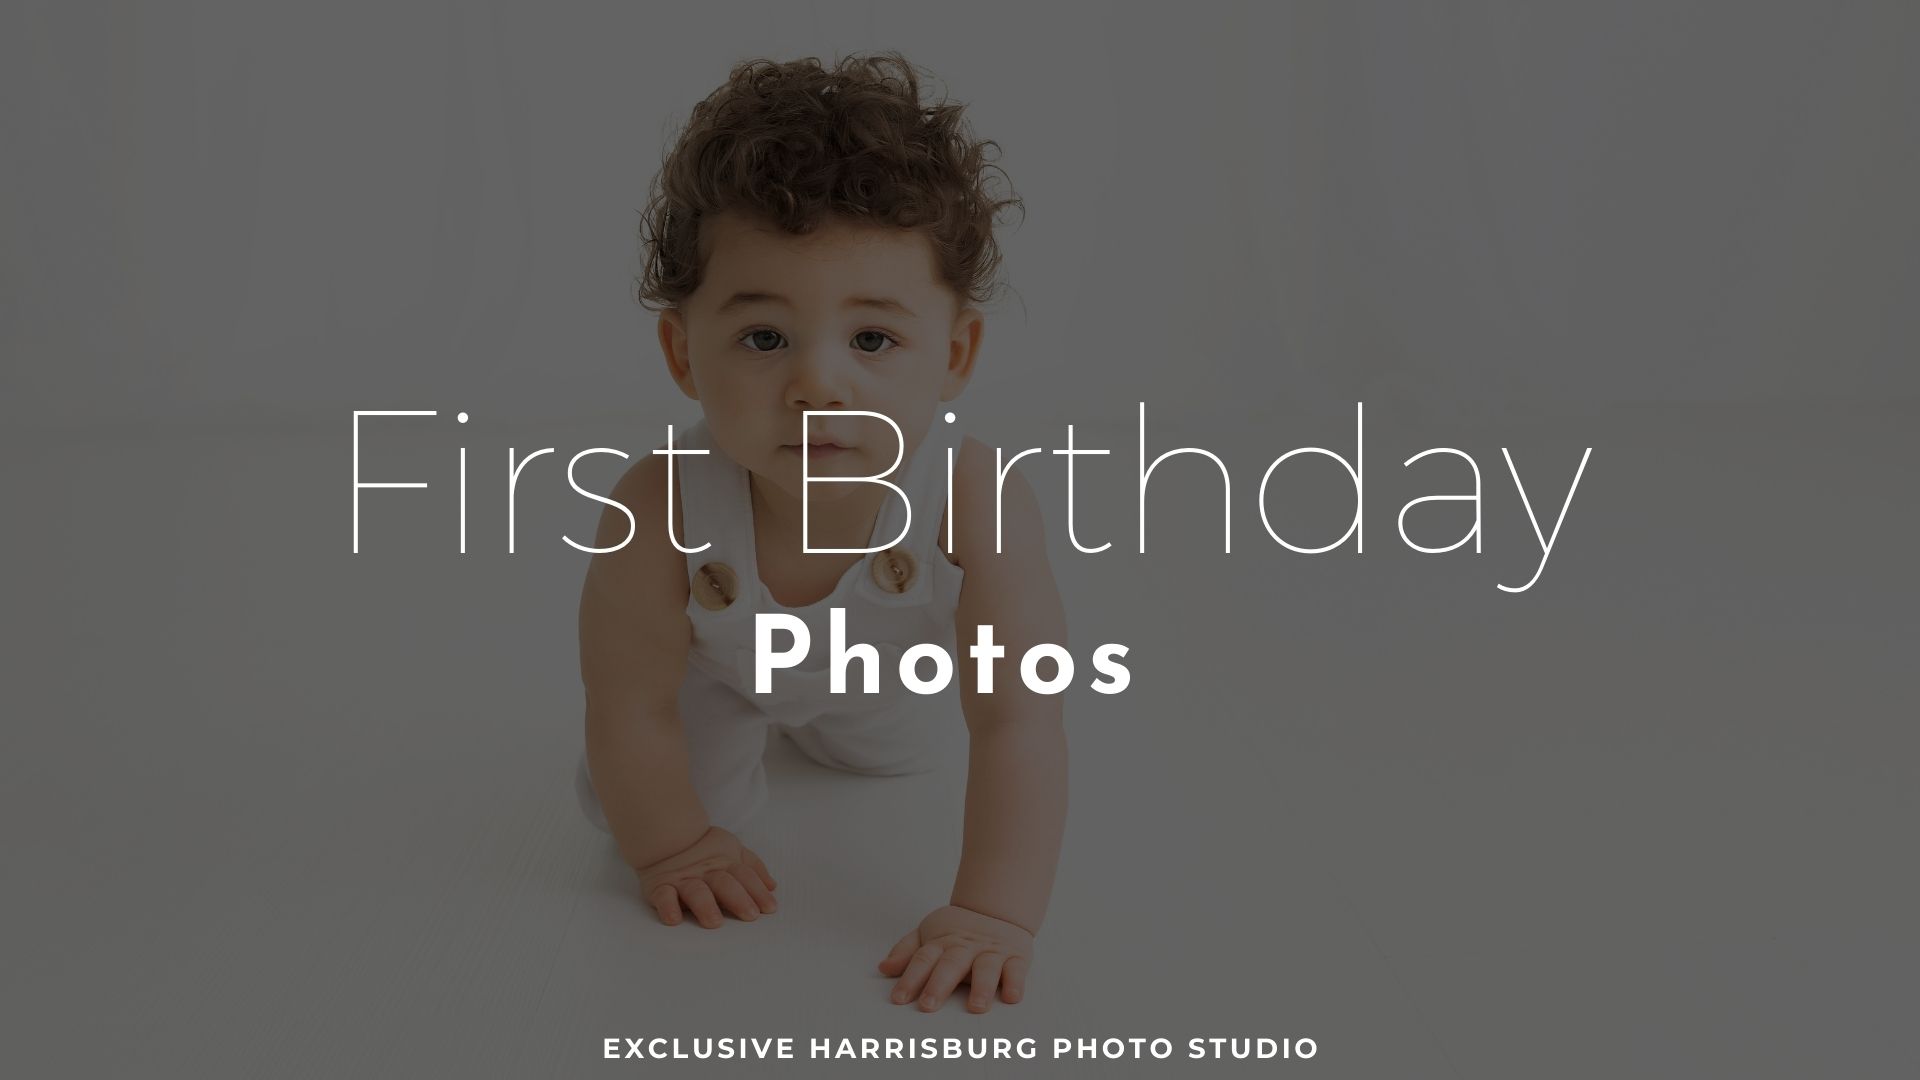 First Birthday Photos Featured Image